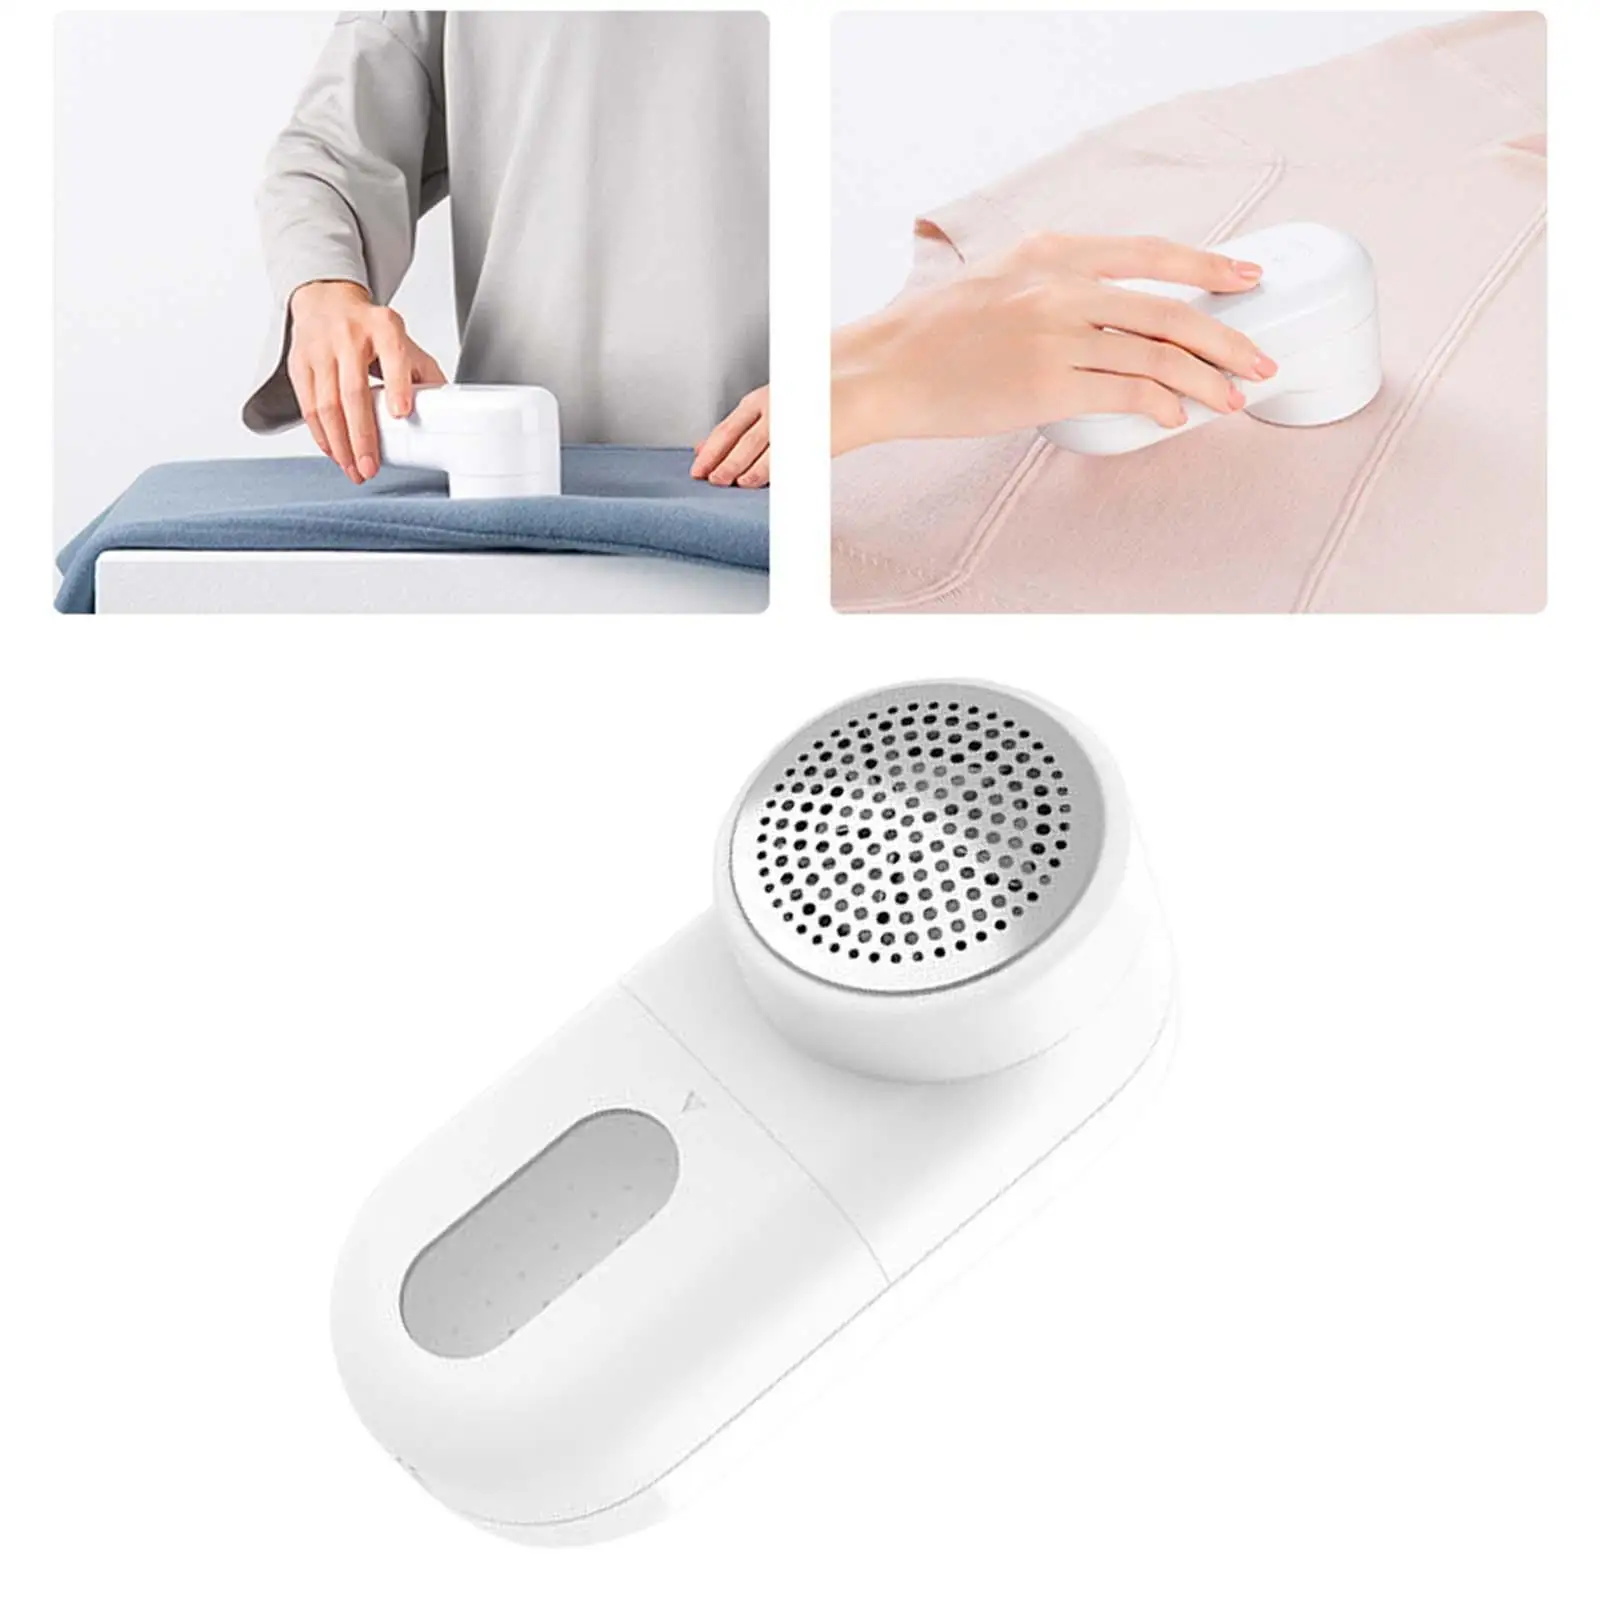 Electric Lint Remover Electric Clothes Sweater Fabric Shaver Remove Fuzz Flannel